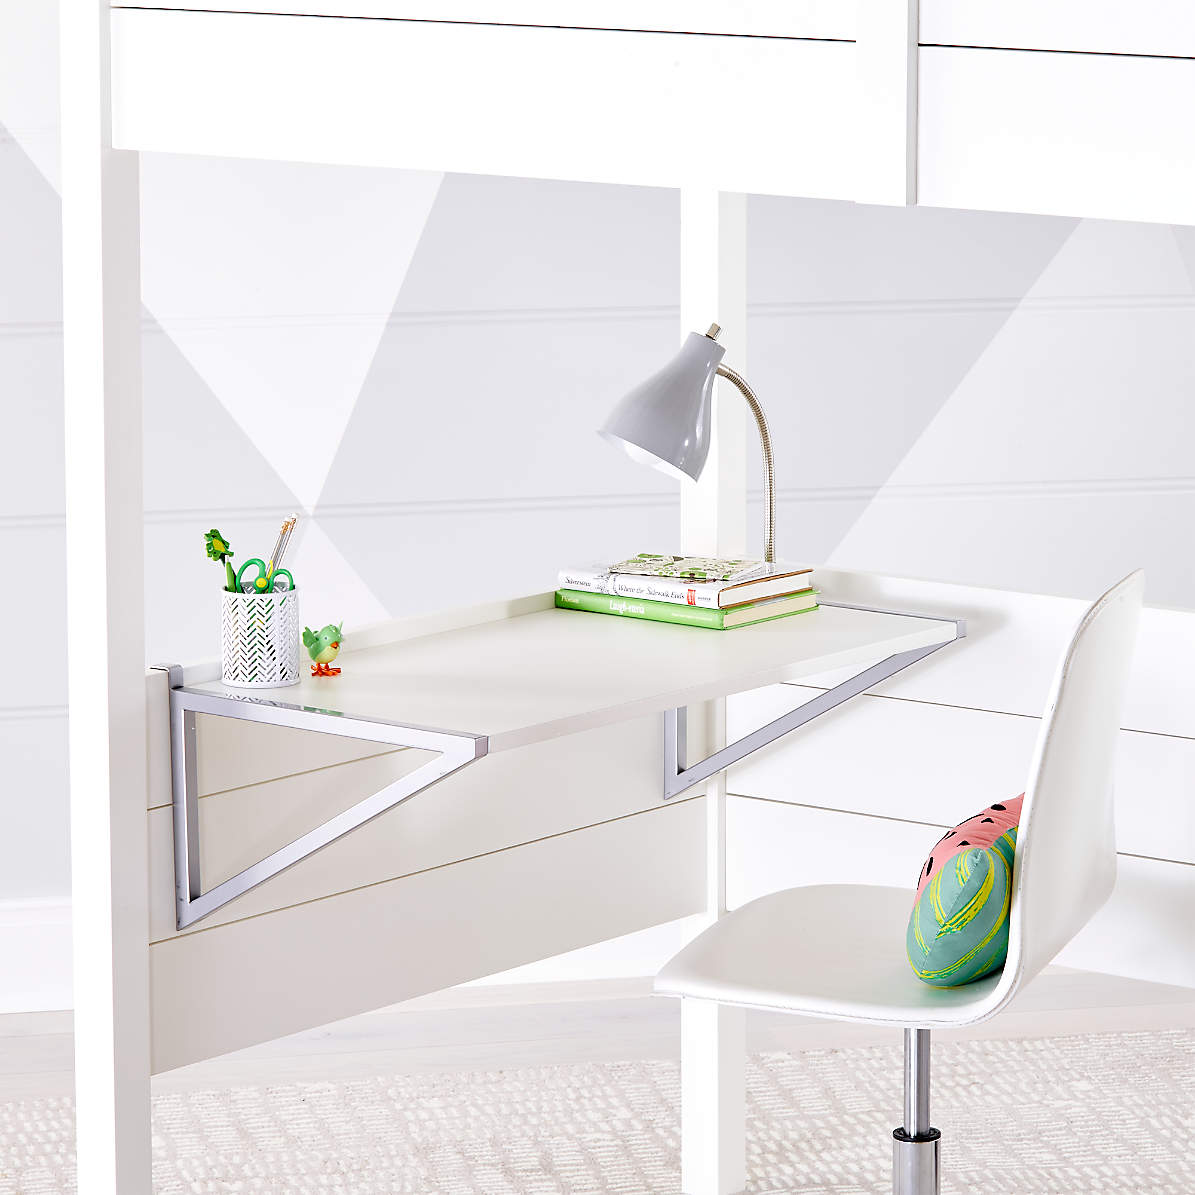 white loft beds with desk